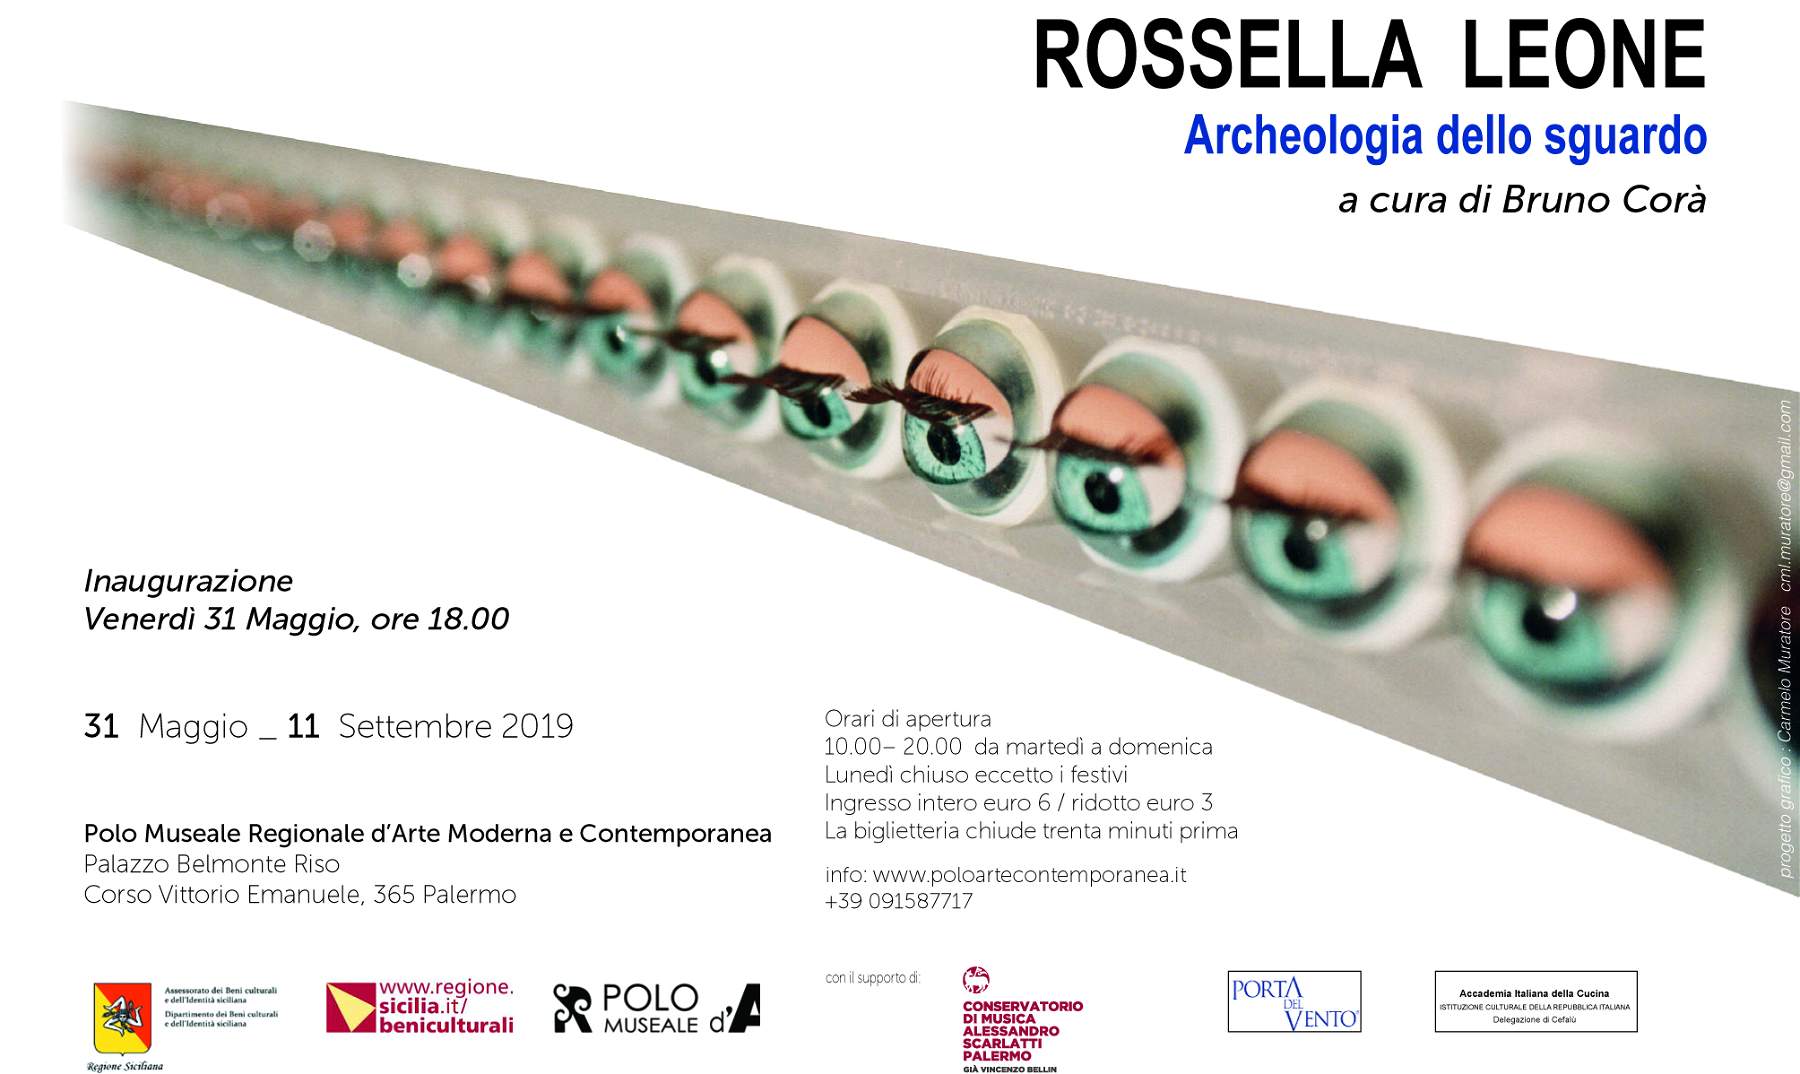 Rossella Leone's works on display in Palermo in the exhibition Archaeology of the Gaze